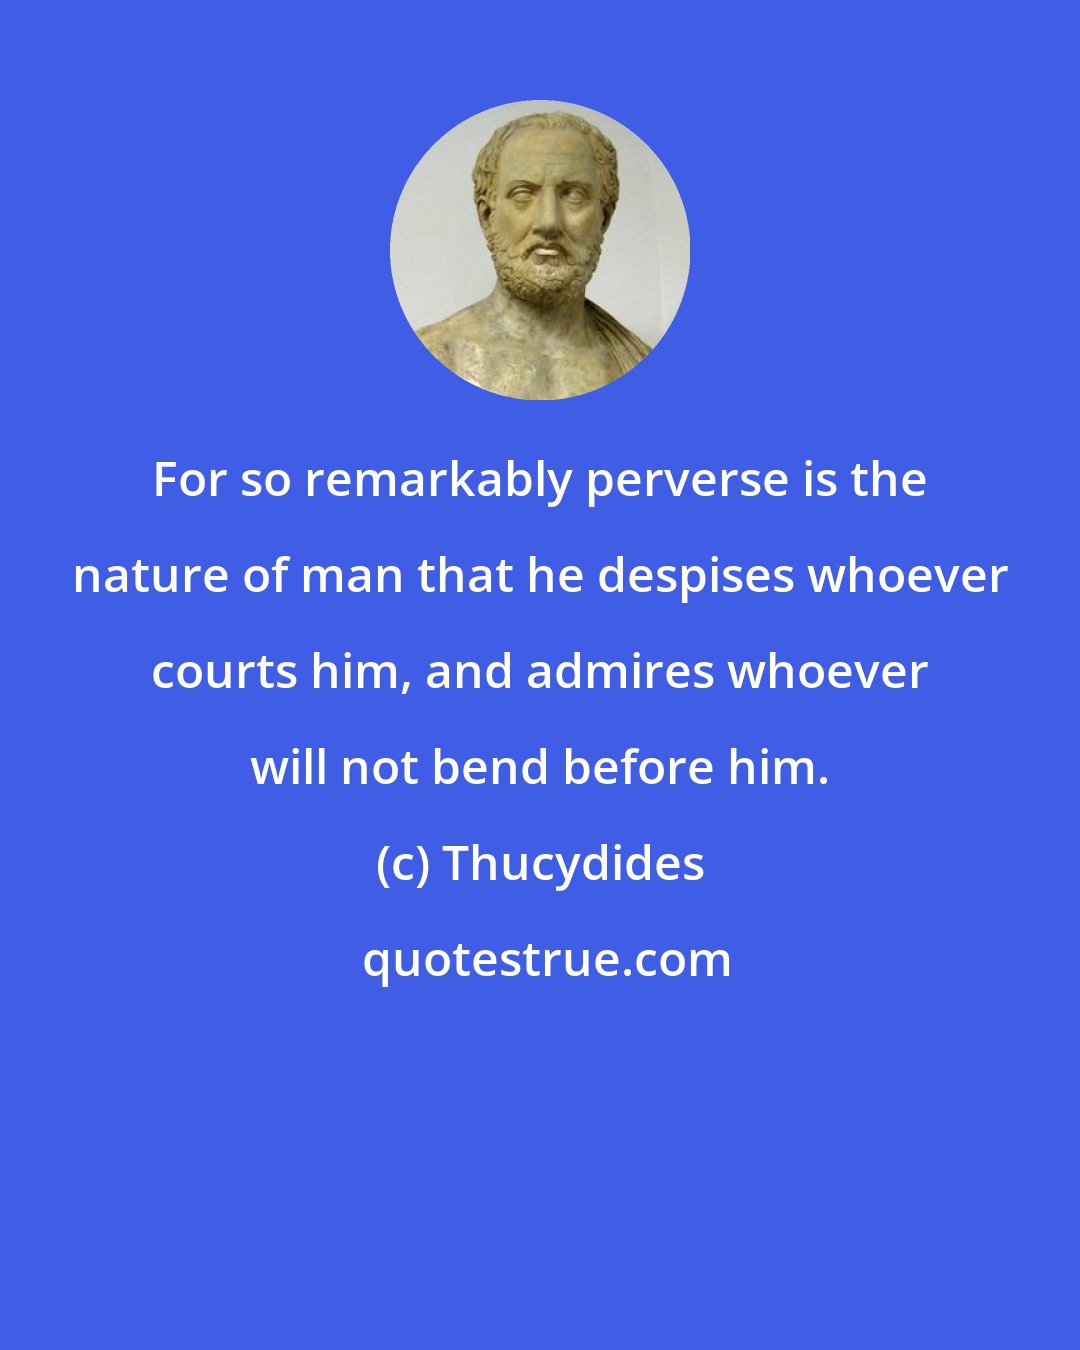 Thucydides: For so remarkably perverse is the nature of man that he despises whoever courts him, and admires whoever will not bend before him.